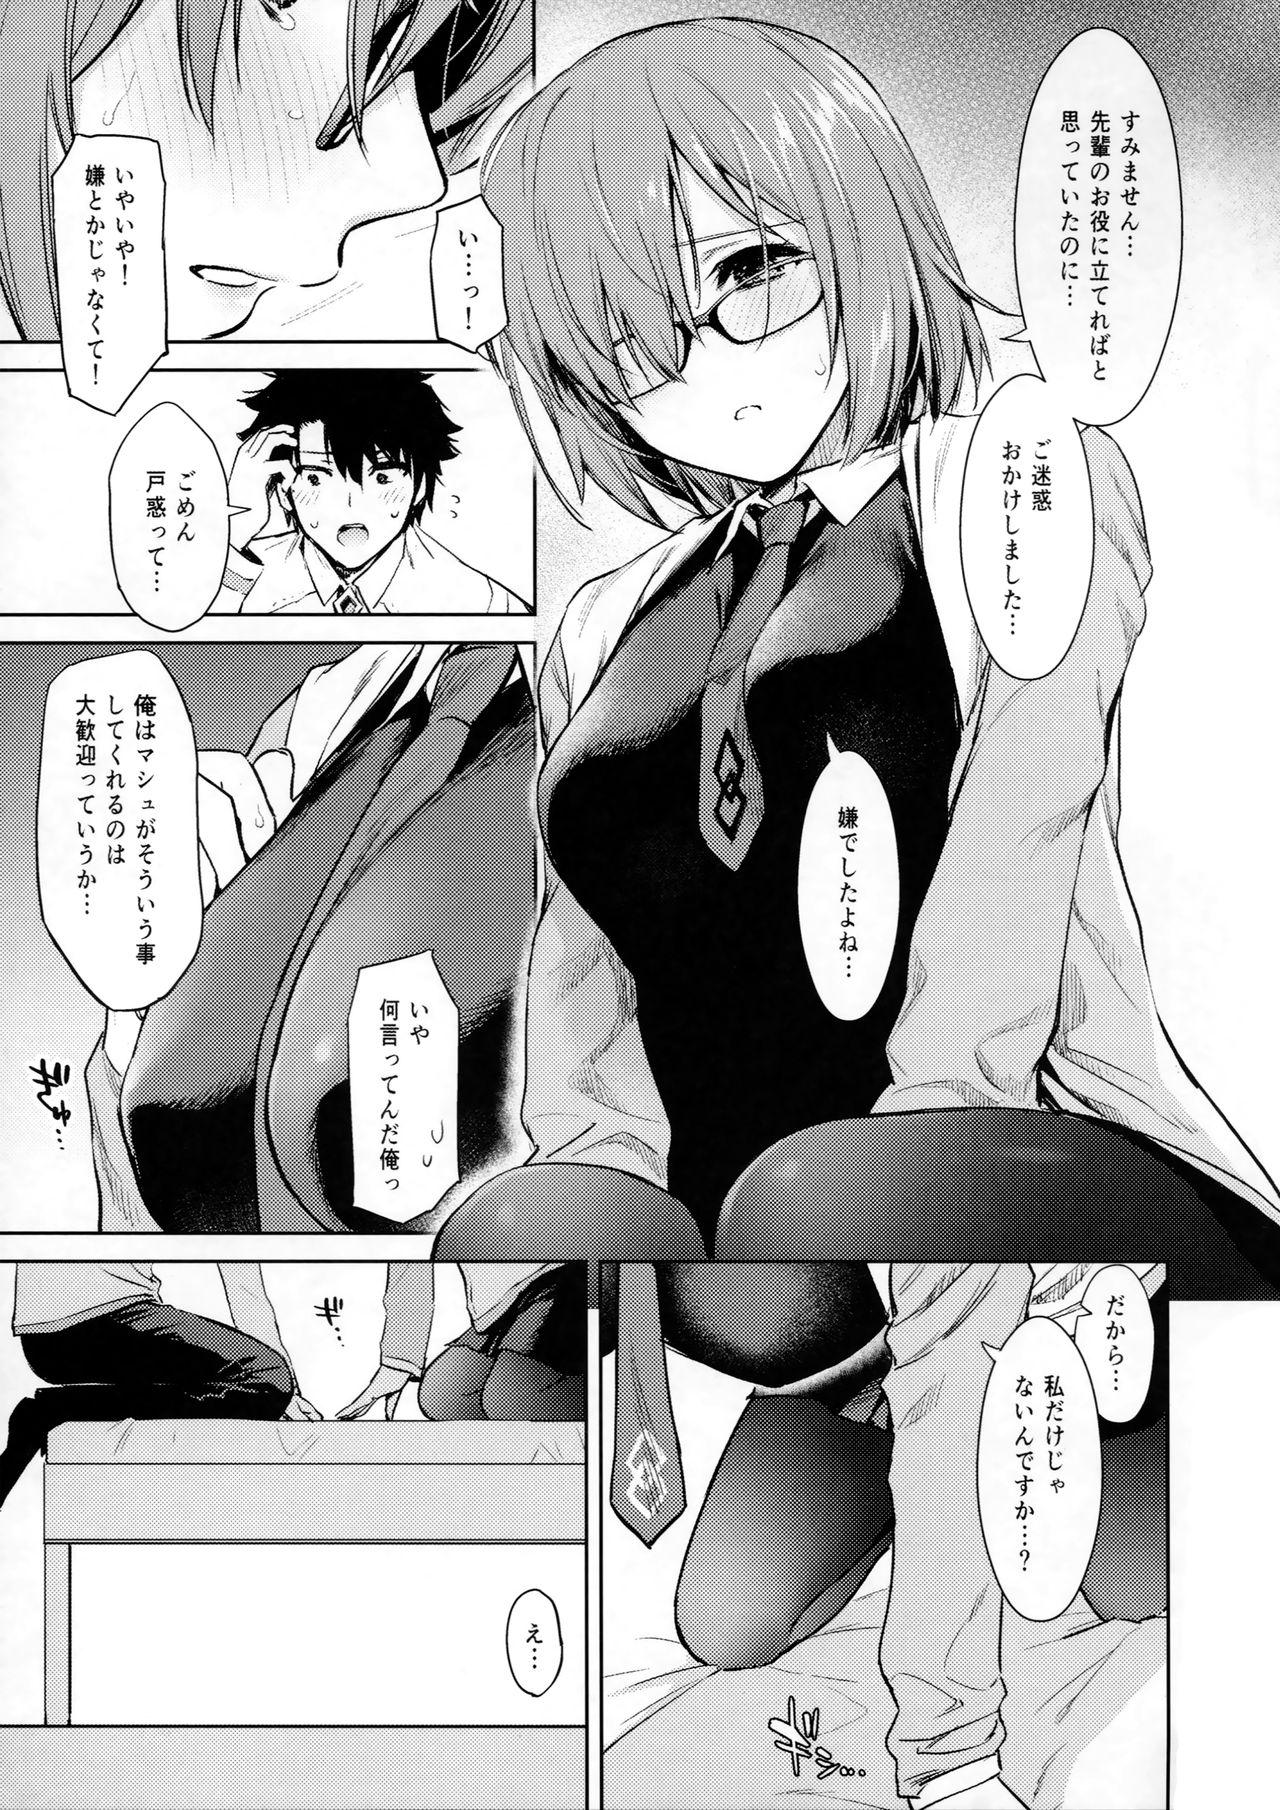 1080p MASH, HORNY, MASH - Fate grand order Caliente - Page 6